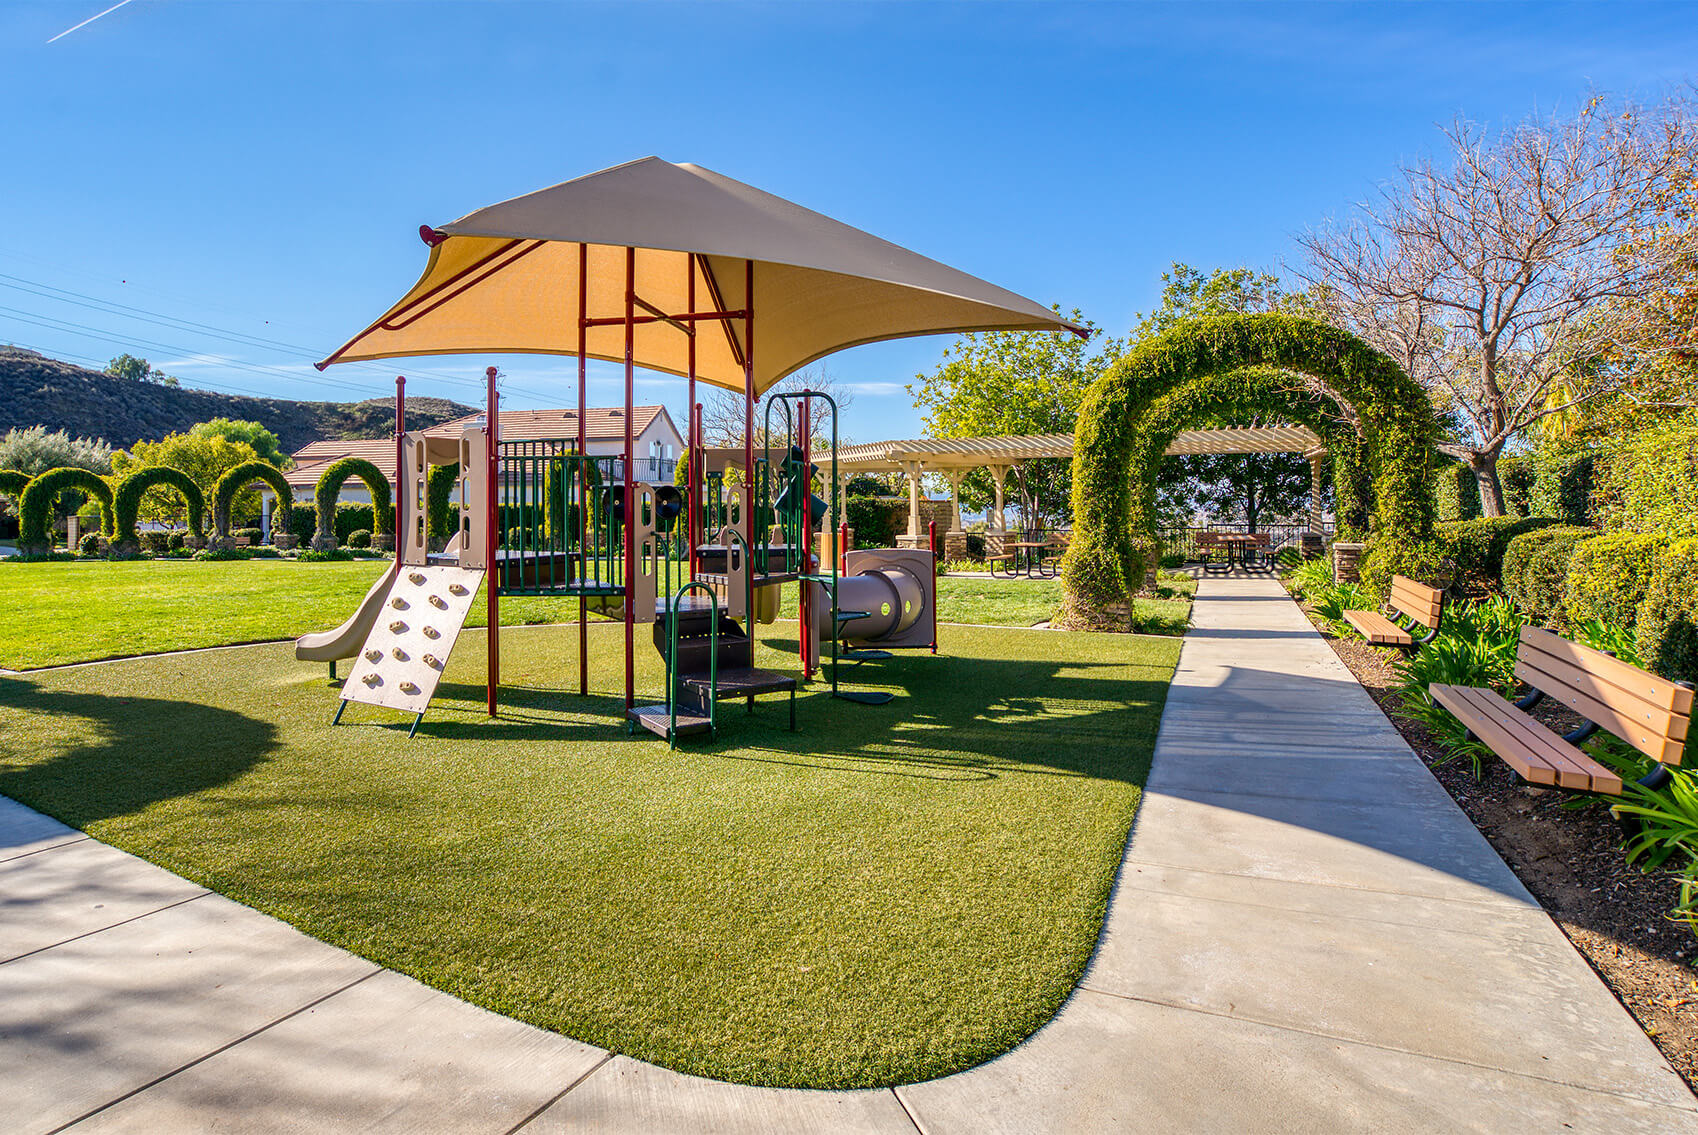 Check out our blog about Settling in Santa Clarita: Embracing Quality Education, Community, and Safety